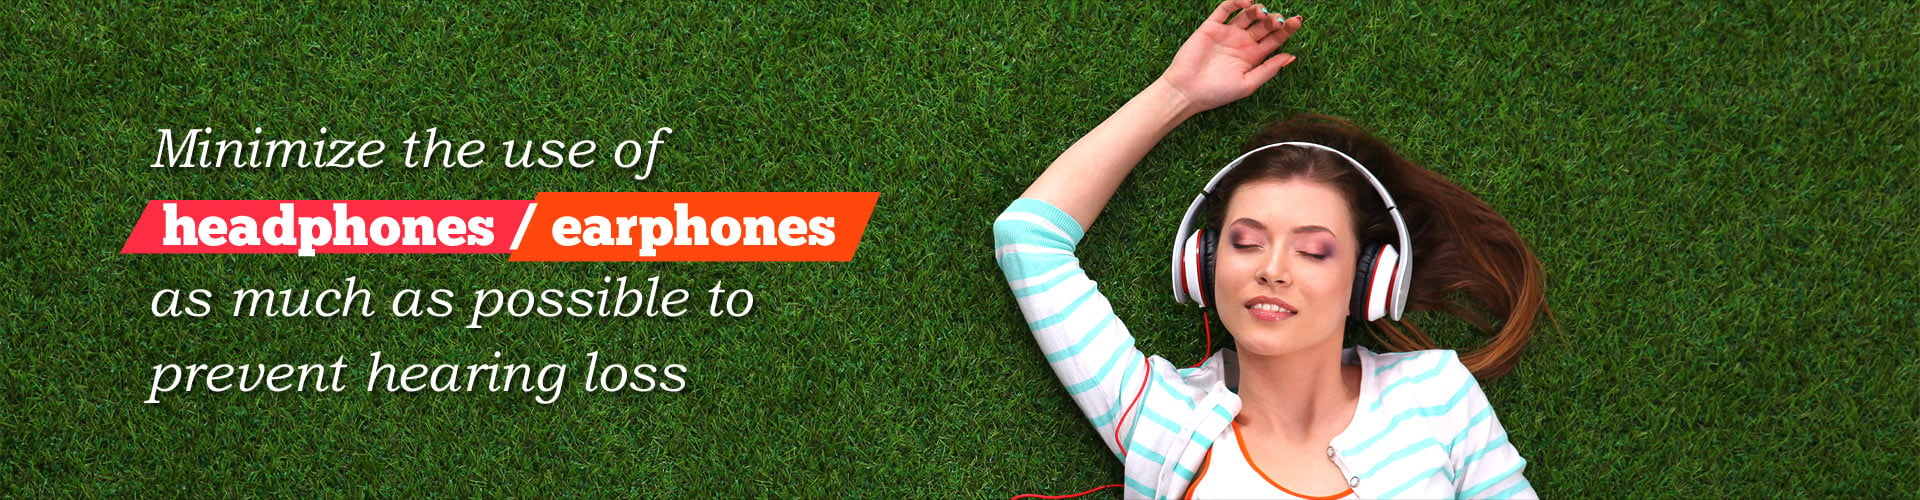 Minimize the use of headphones / earphones as much as possible to prevent hearing loss